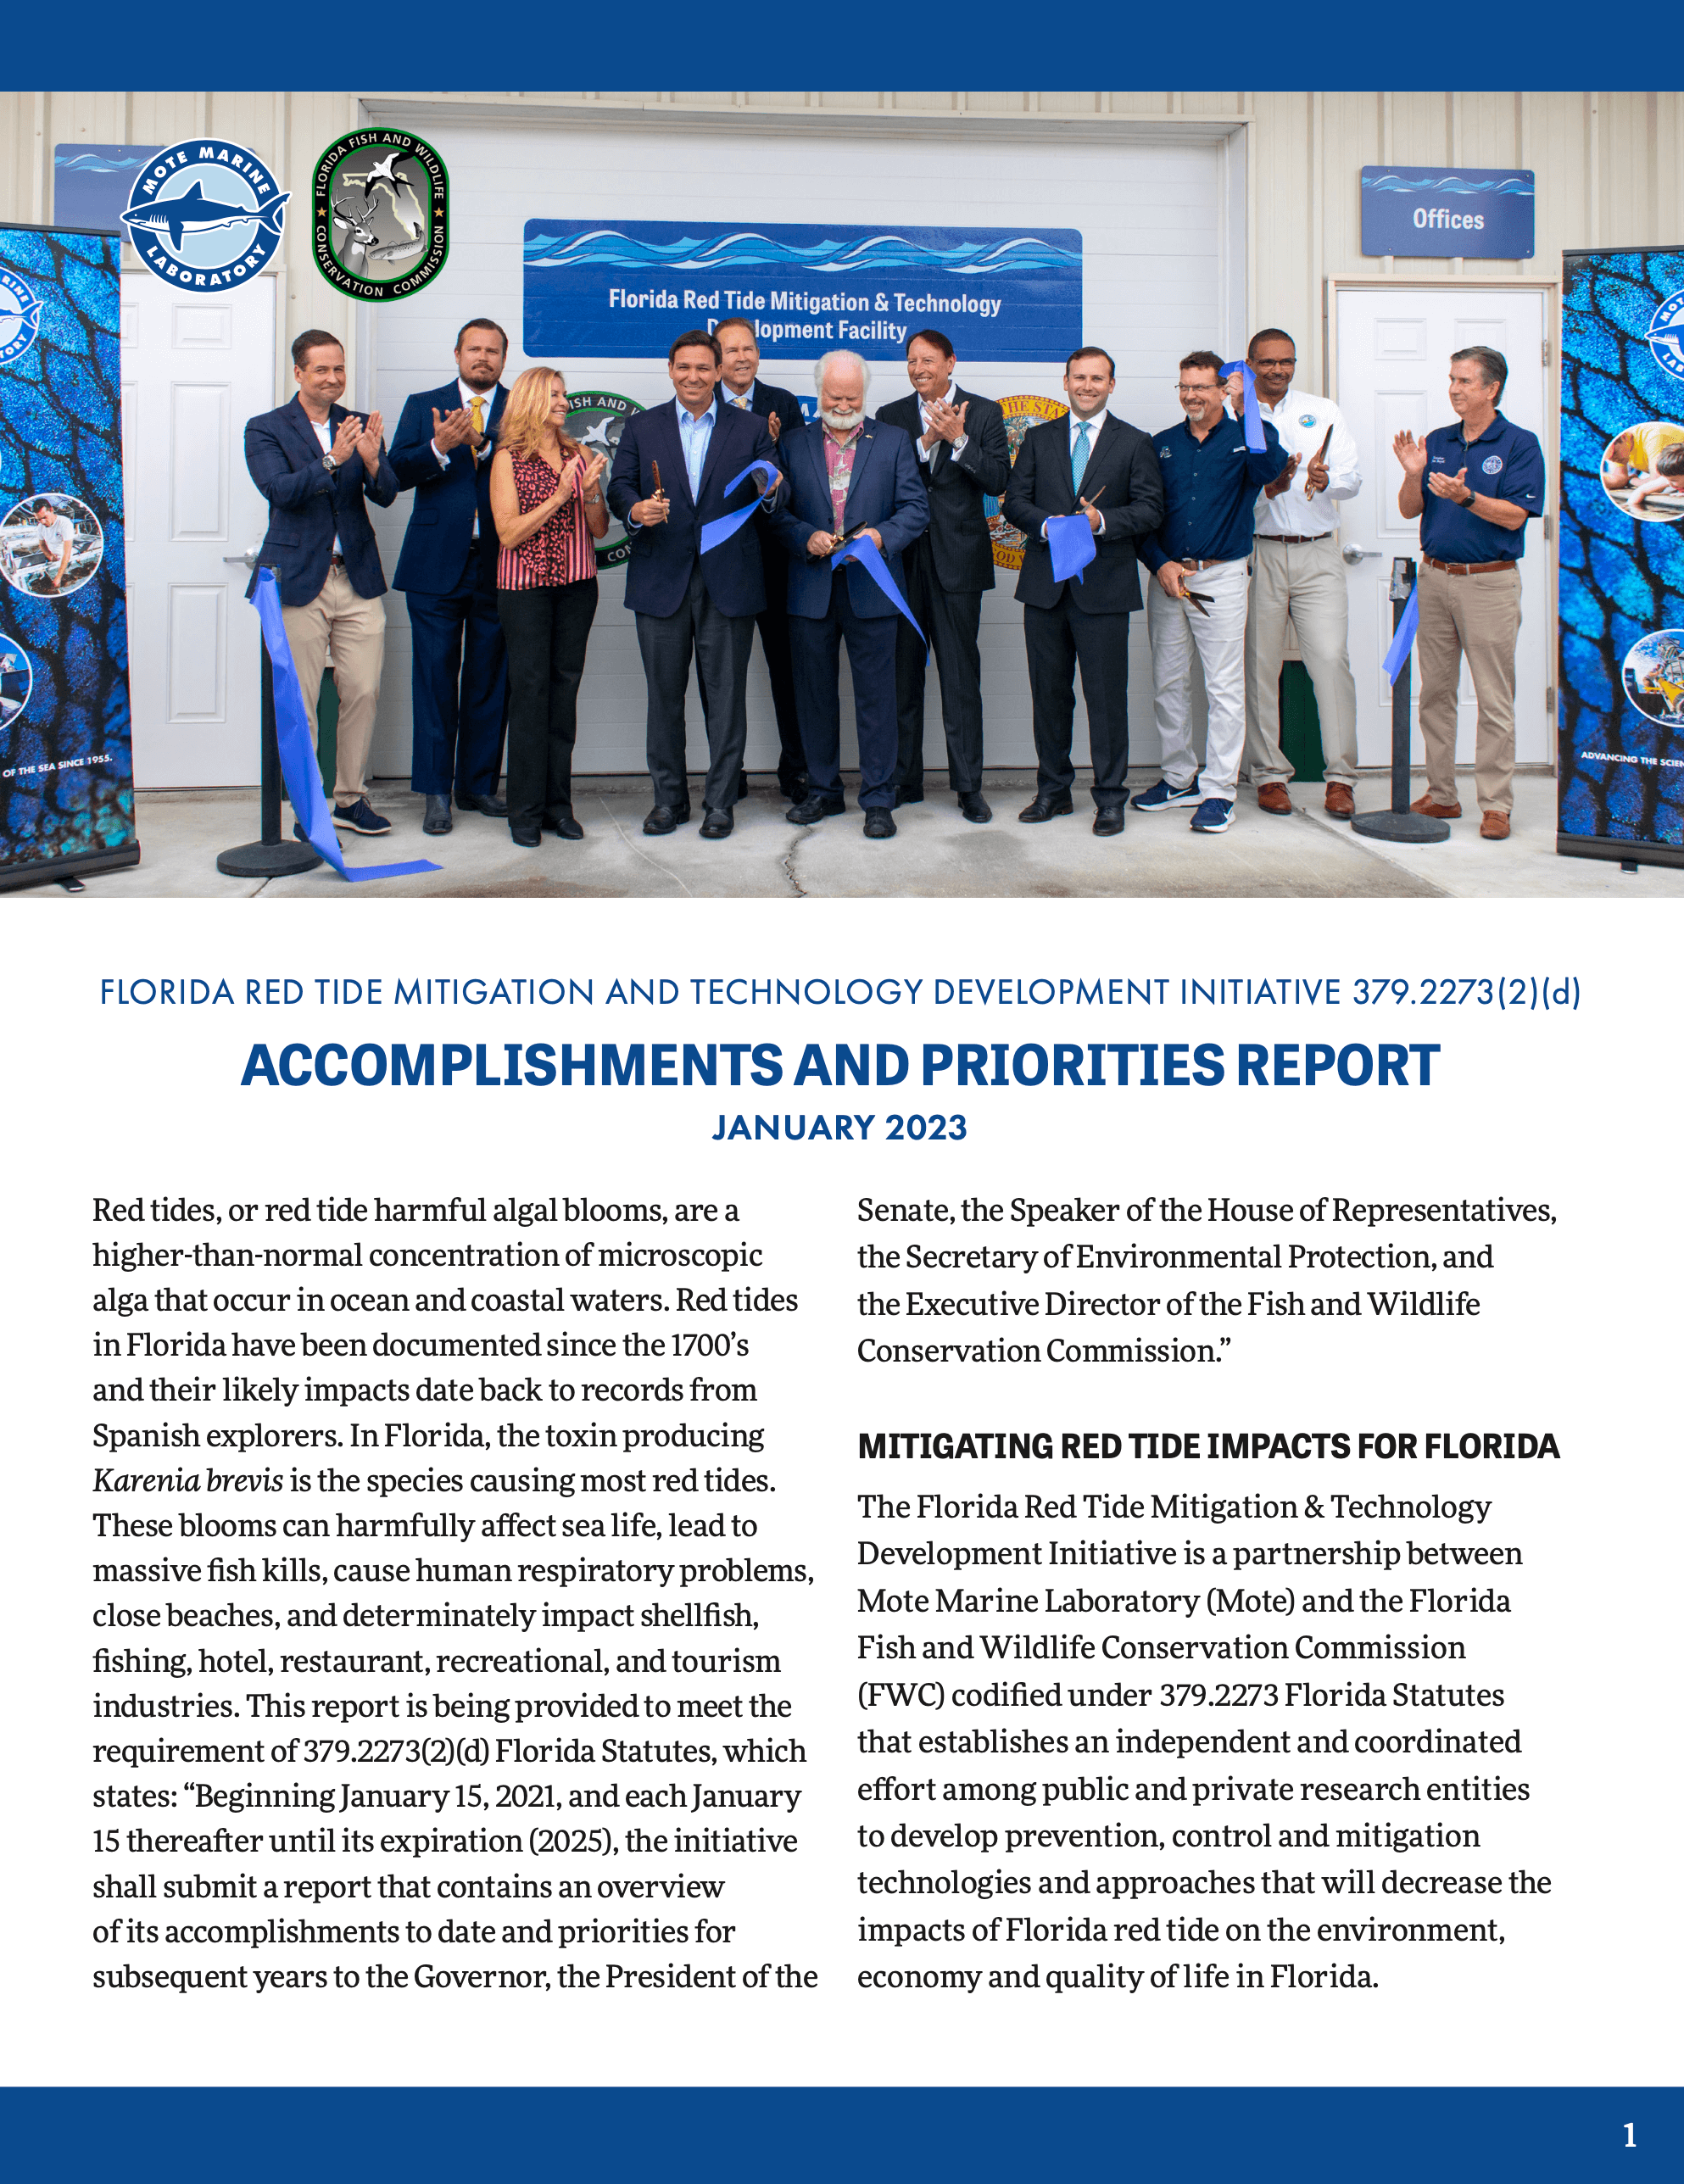 Accomplishments and priorities report for January 2023